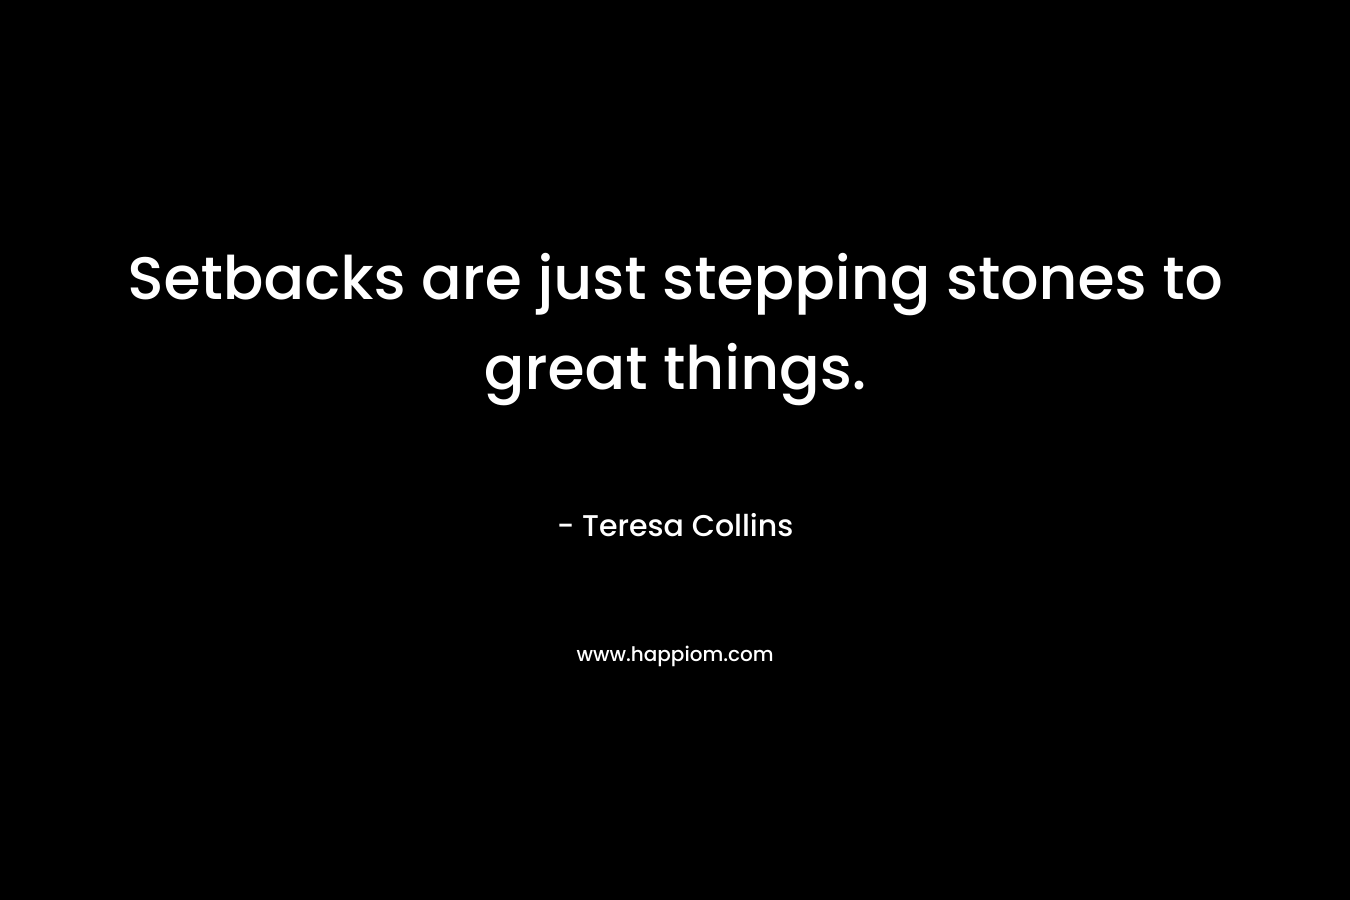 Setbacks are just stepping stones to great things.